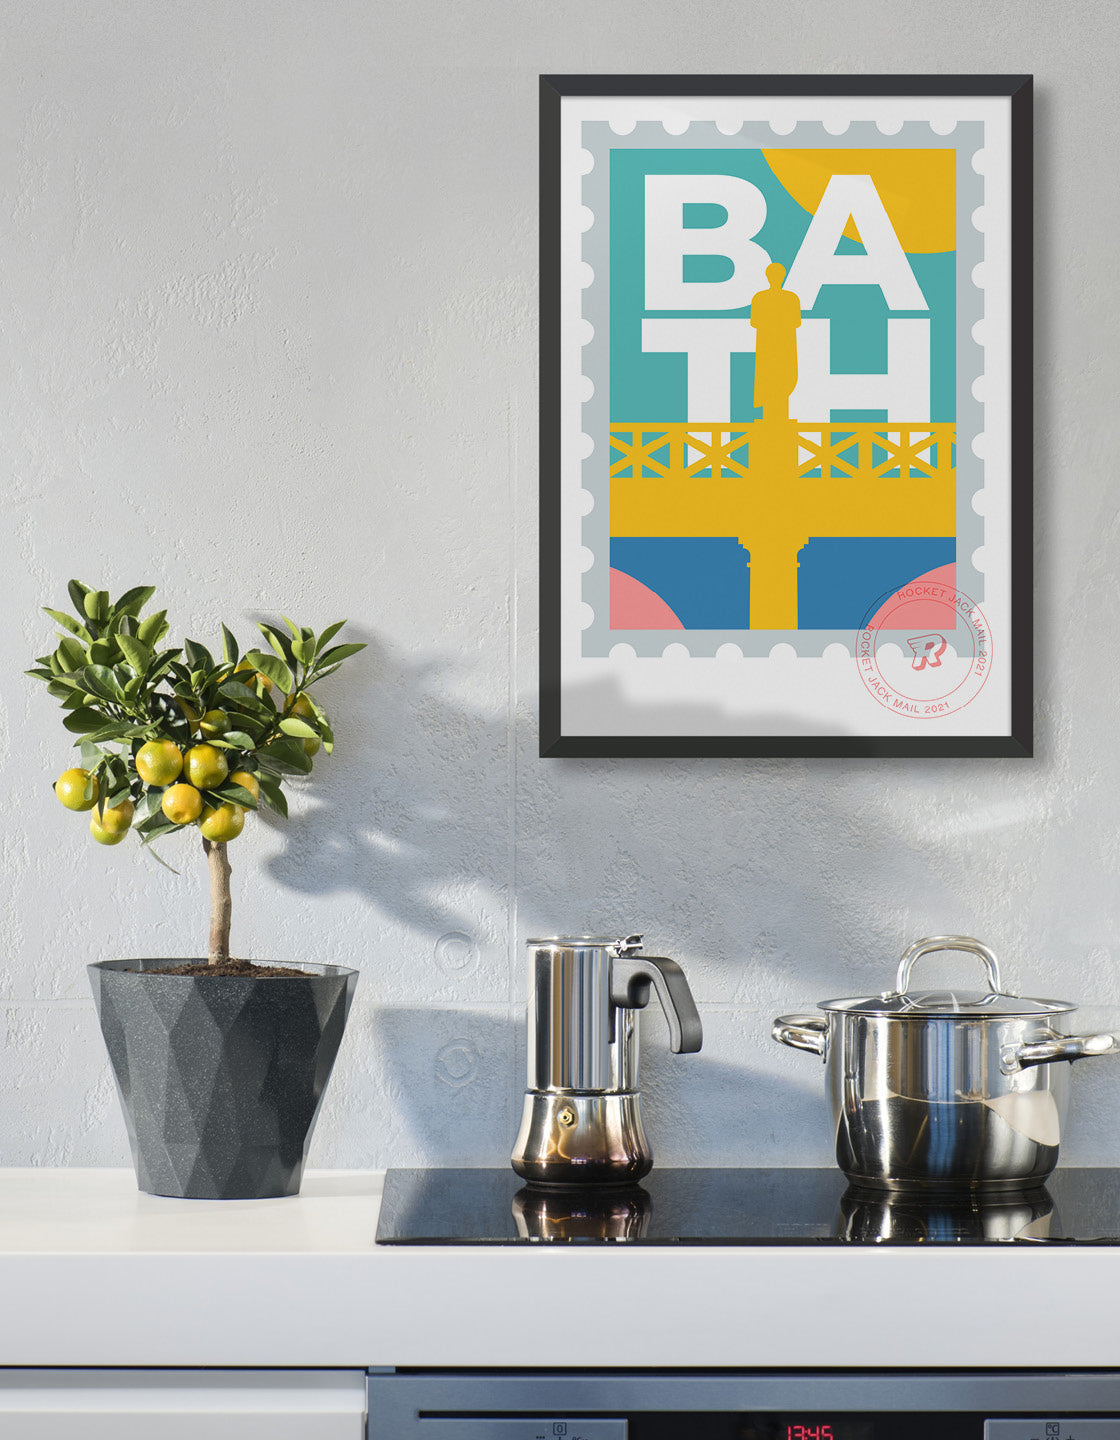 Lifestyle image depicts the customisable Bath stamp print featuring a roman statue against a bright background